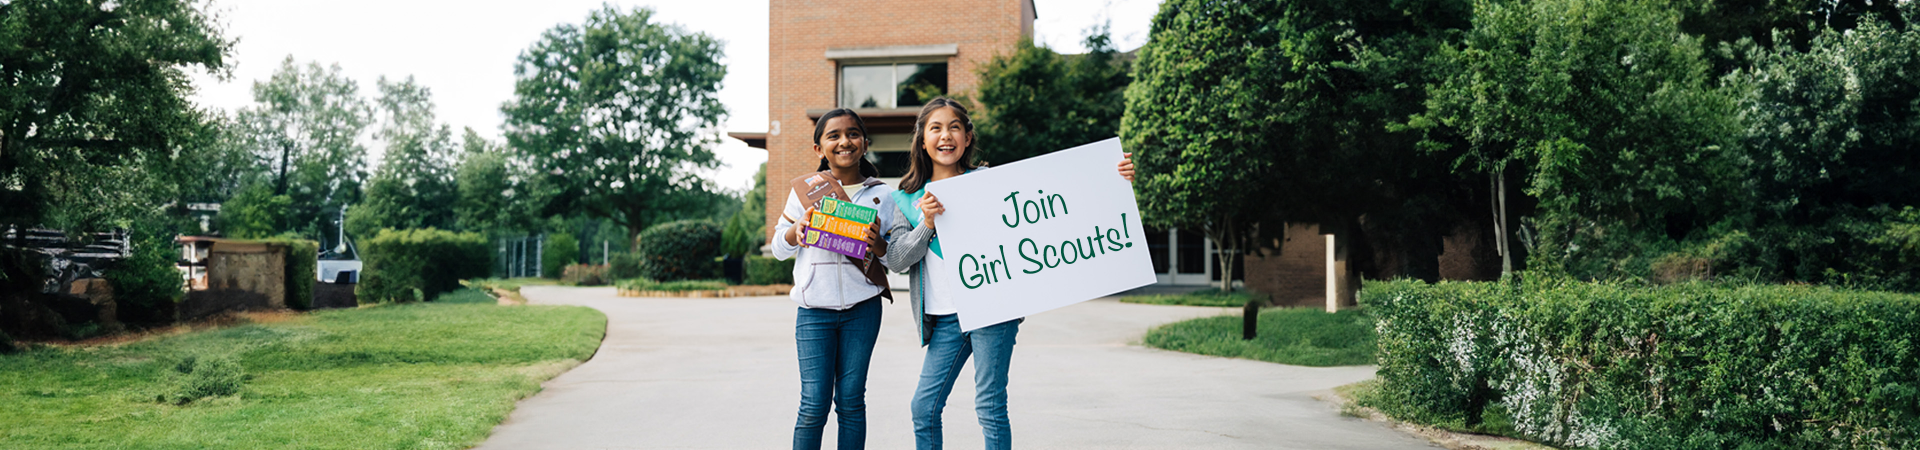  Group of Girl Scouts smiling at each other outdoors 